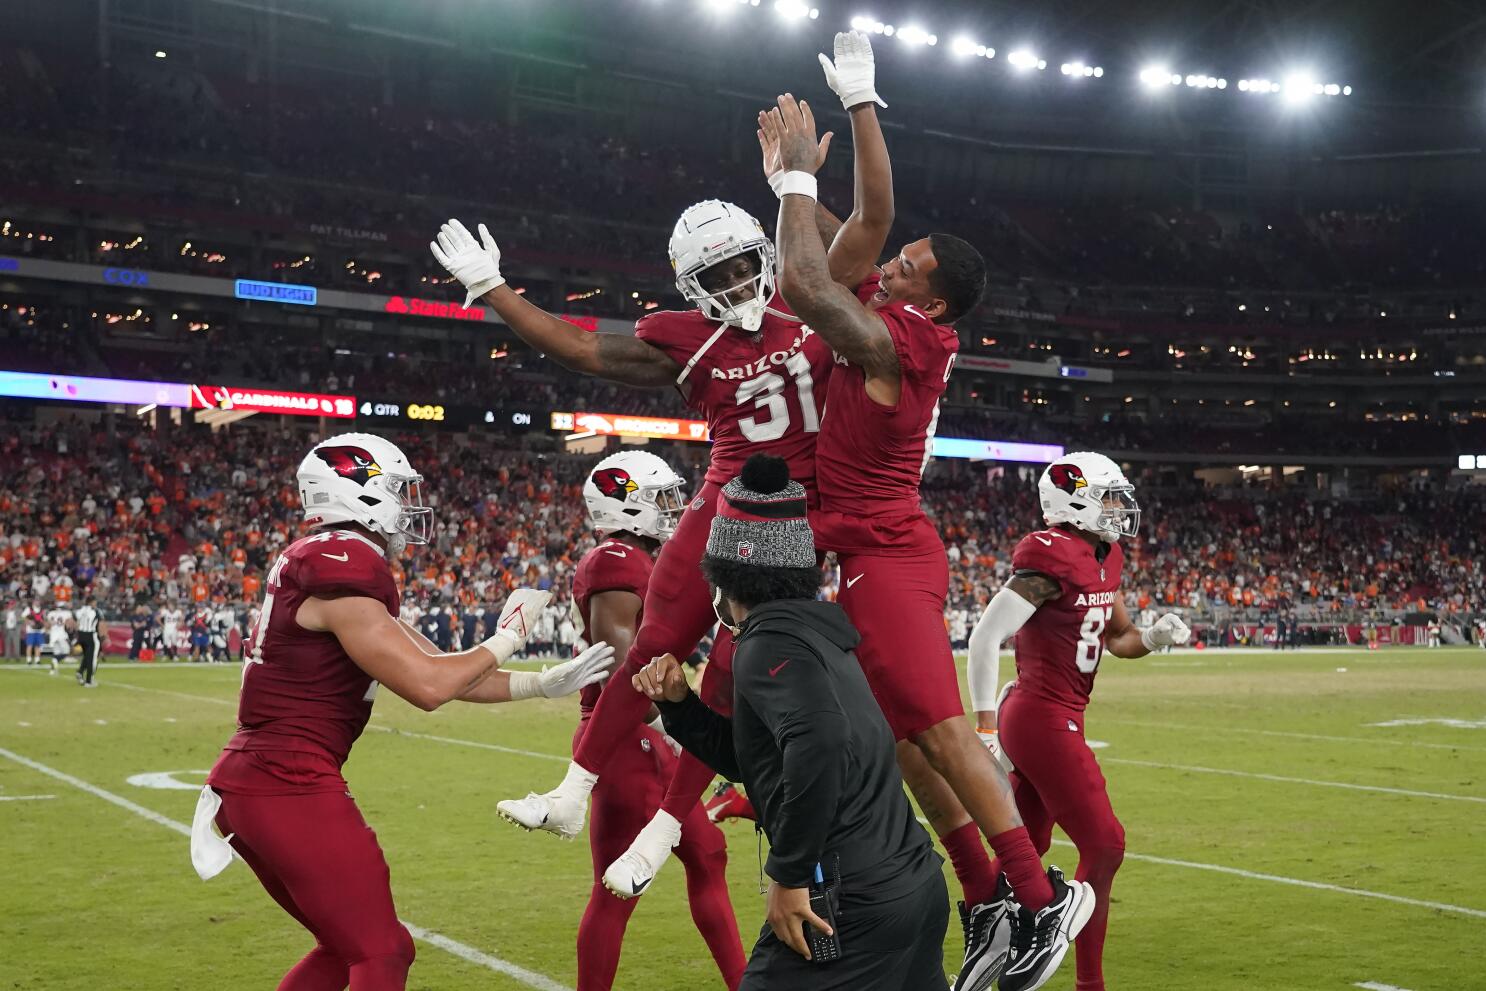 Russell Wilson throws TD pass before Cardinals mount comeback to beat Broncos  18-17 – Western Kansas News